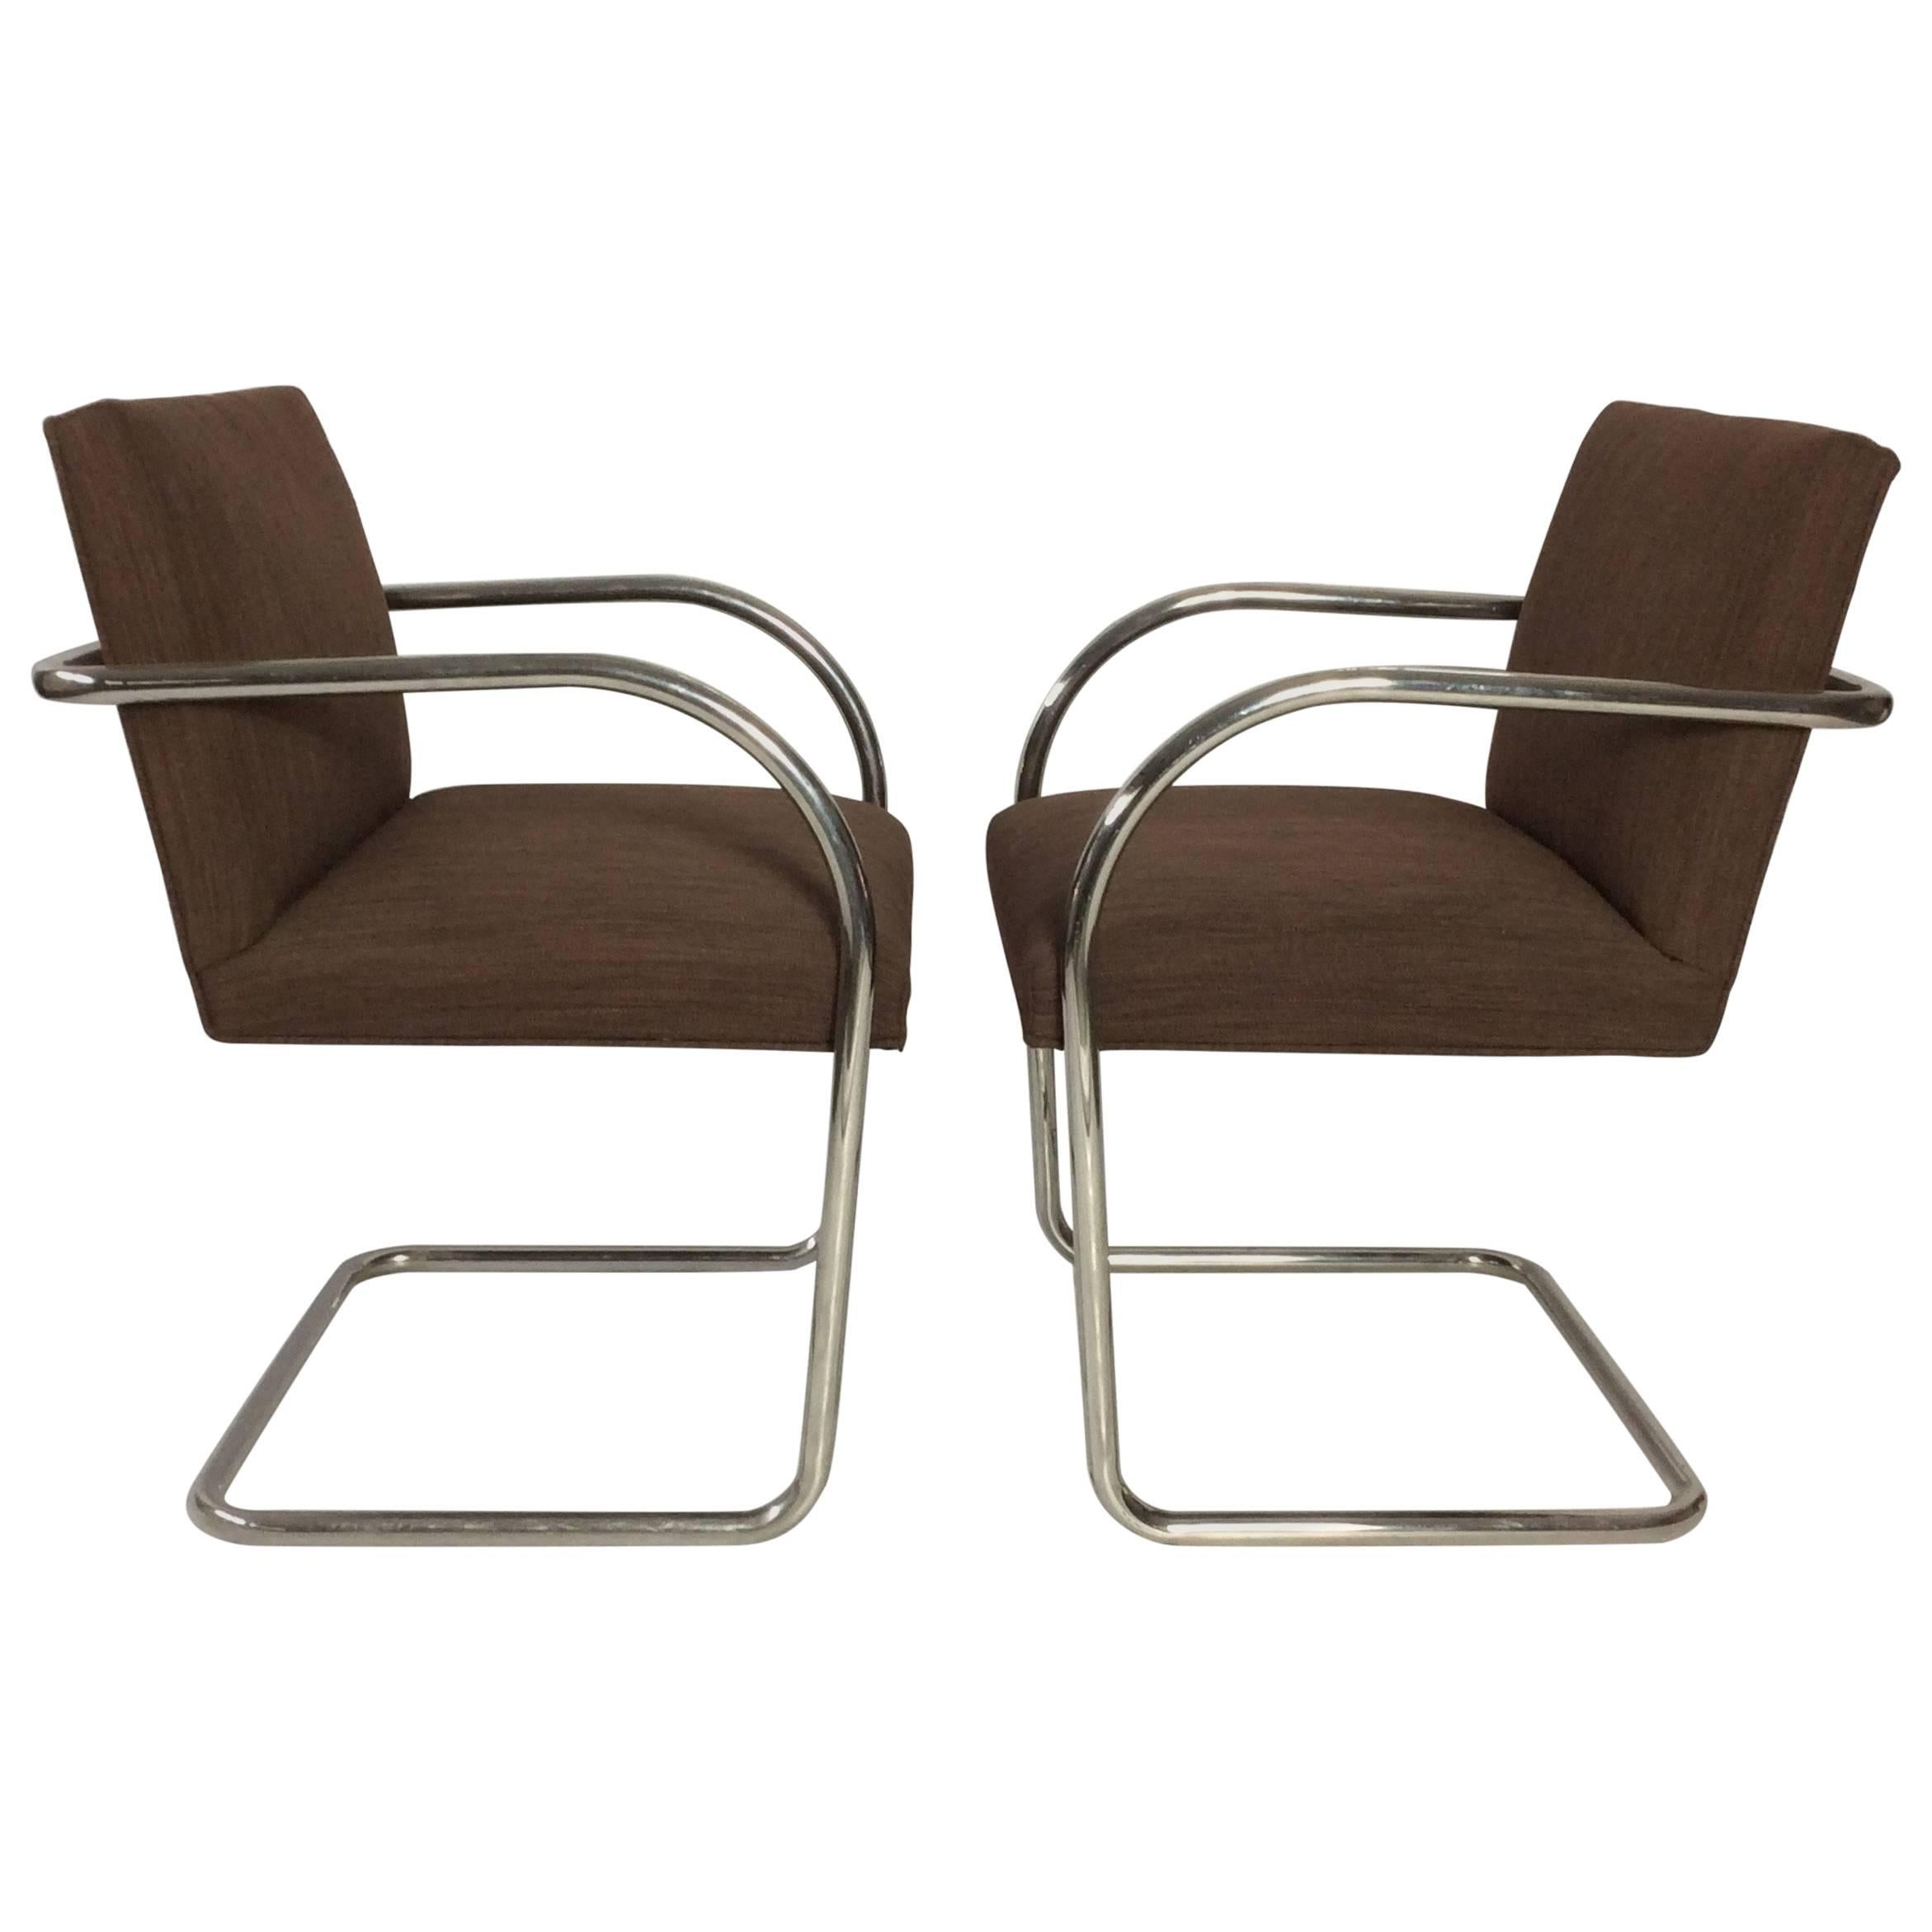 Pair of Mies Van Der Rohe Tubular Chrome Brno Chairs by Knoll For Sale